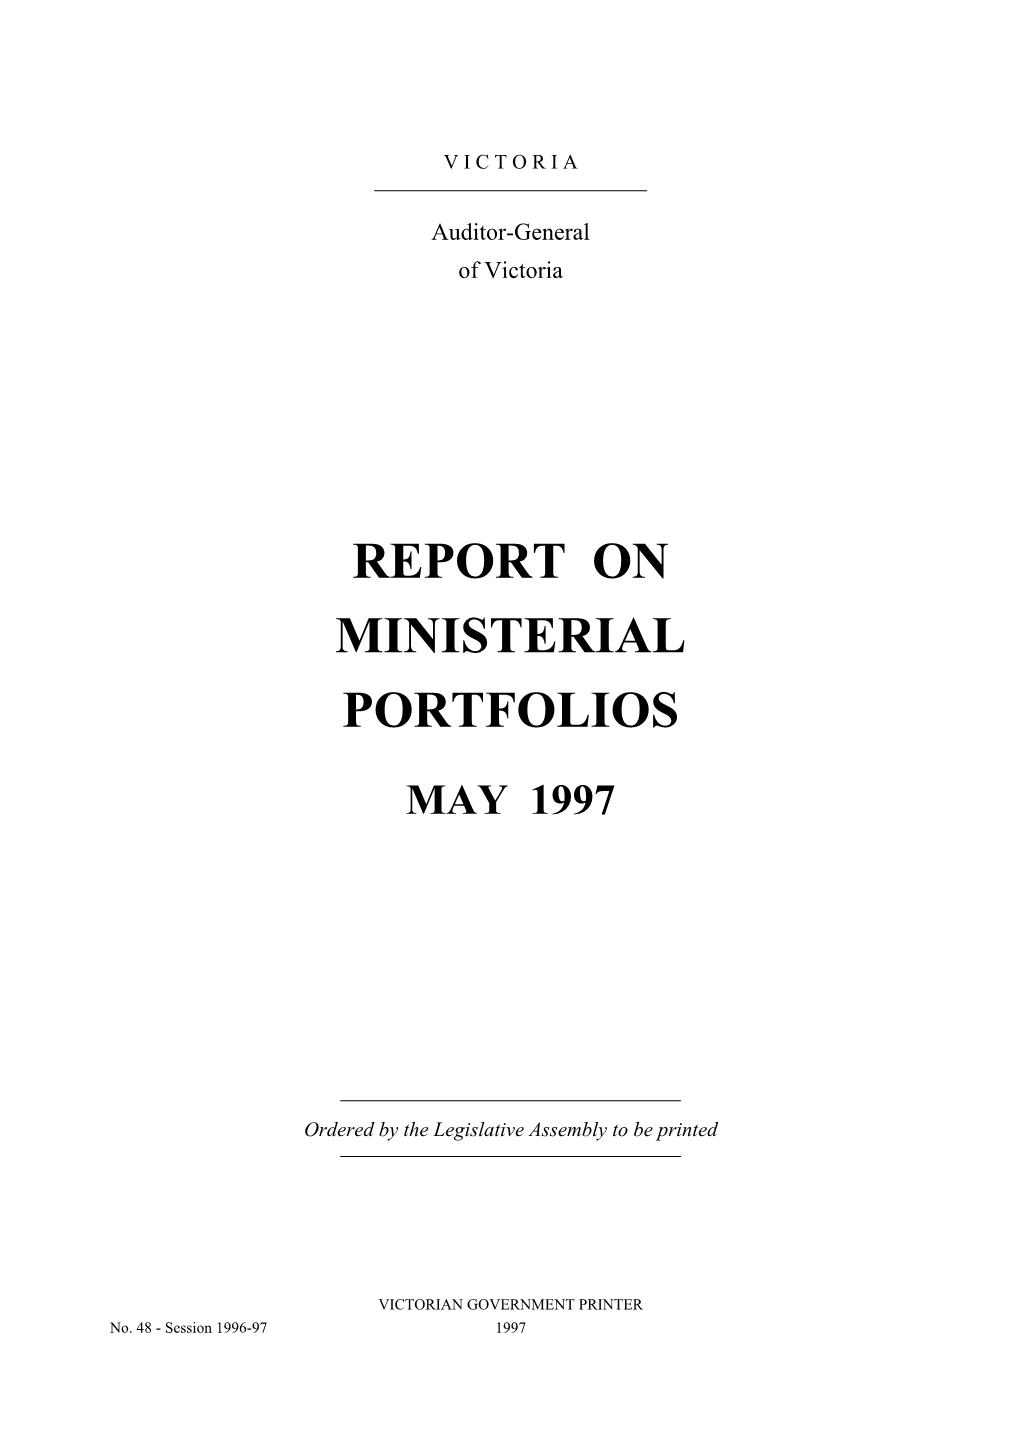 Report on Ministerial Portfolios May 1997